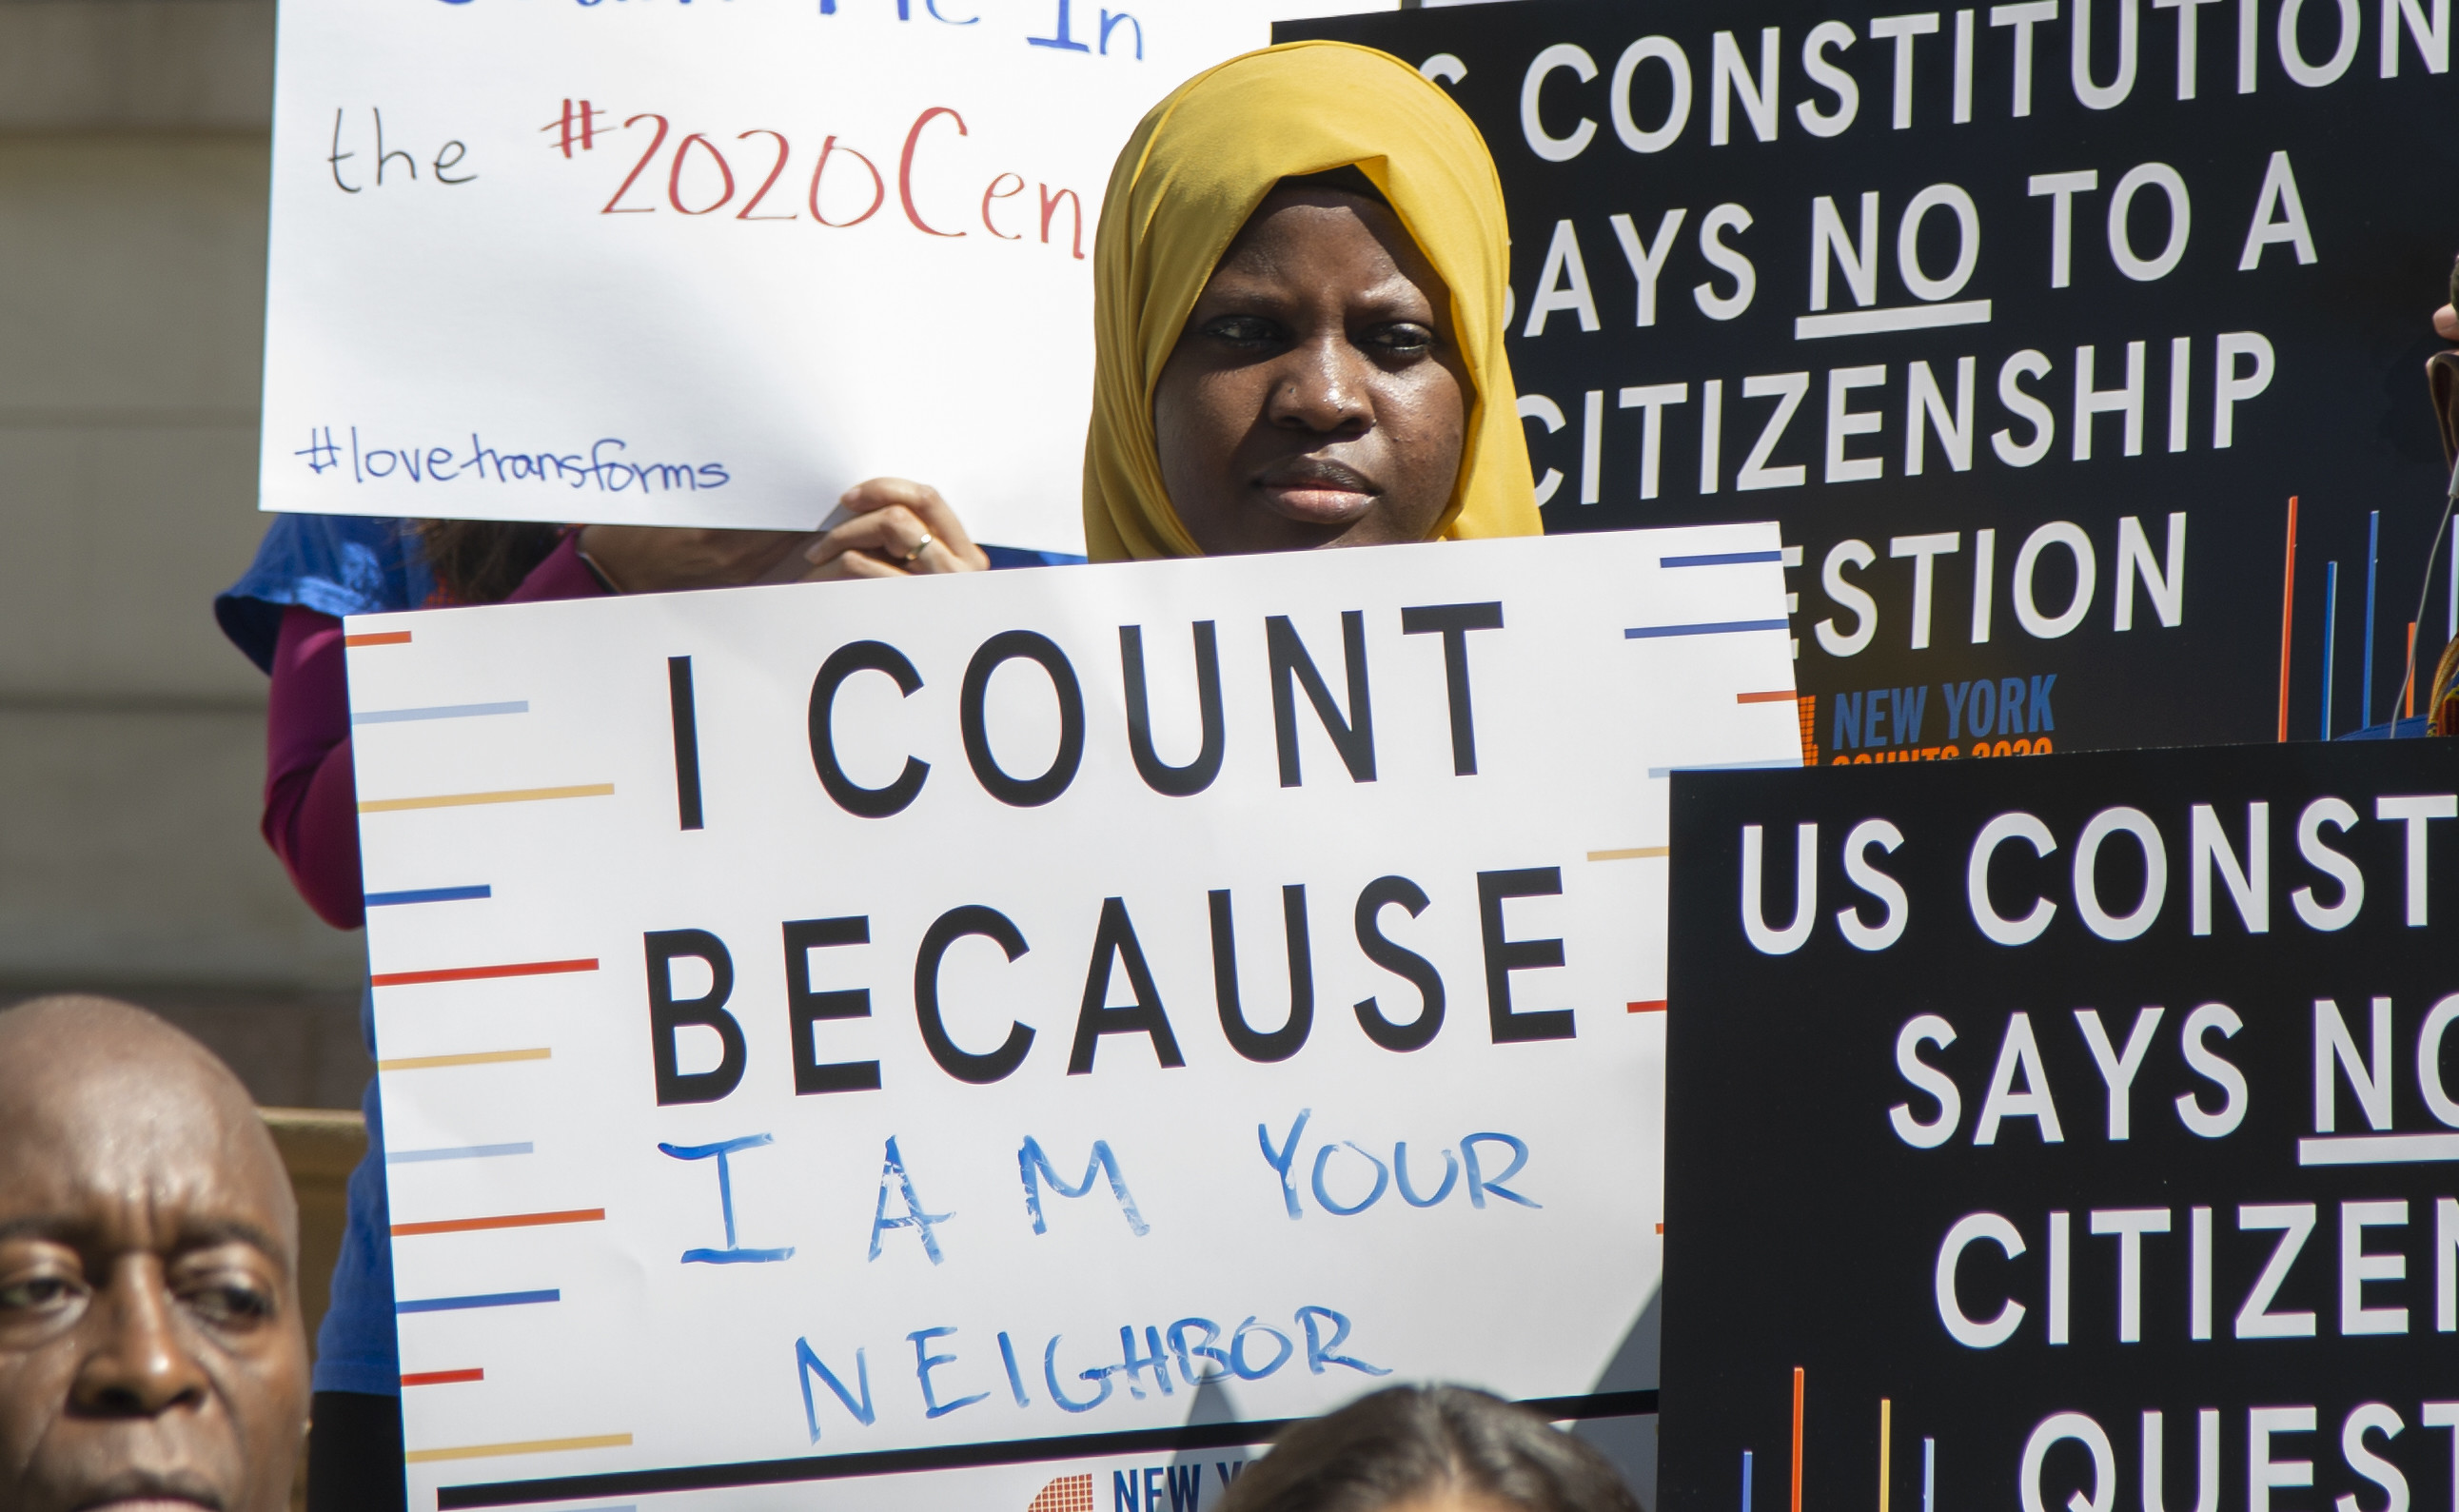 “I Count Because” sign used at a New York City Council press conference, April 23, 2019  Photograph by John McCarten; Courtesy John McCarten / New York City Council